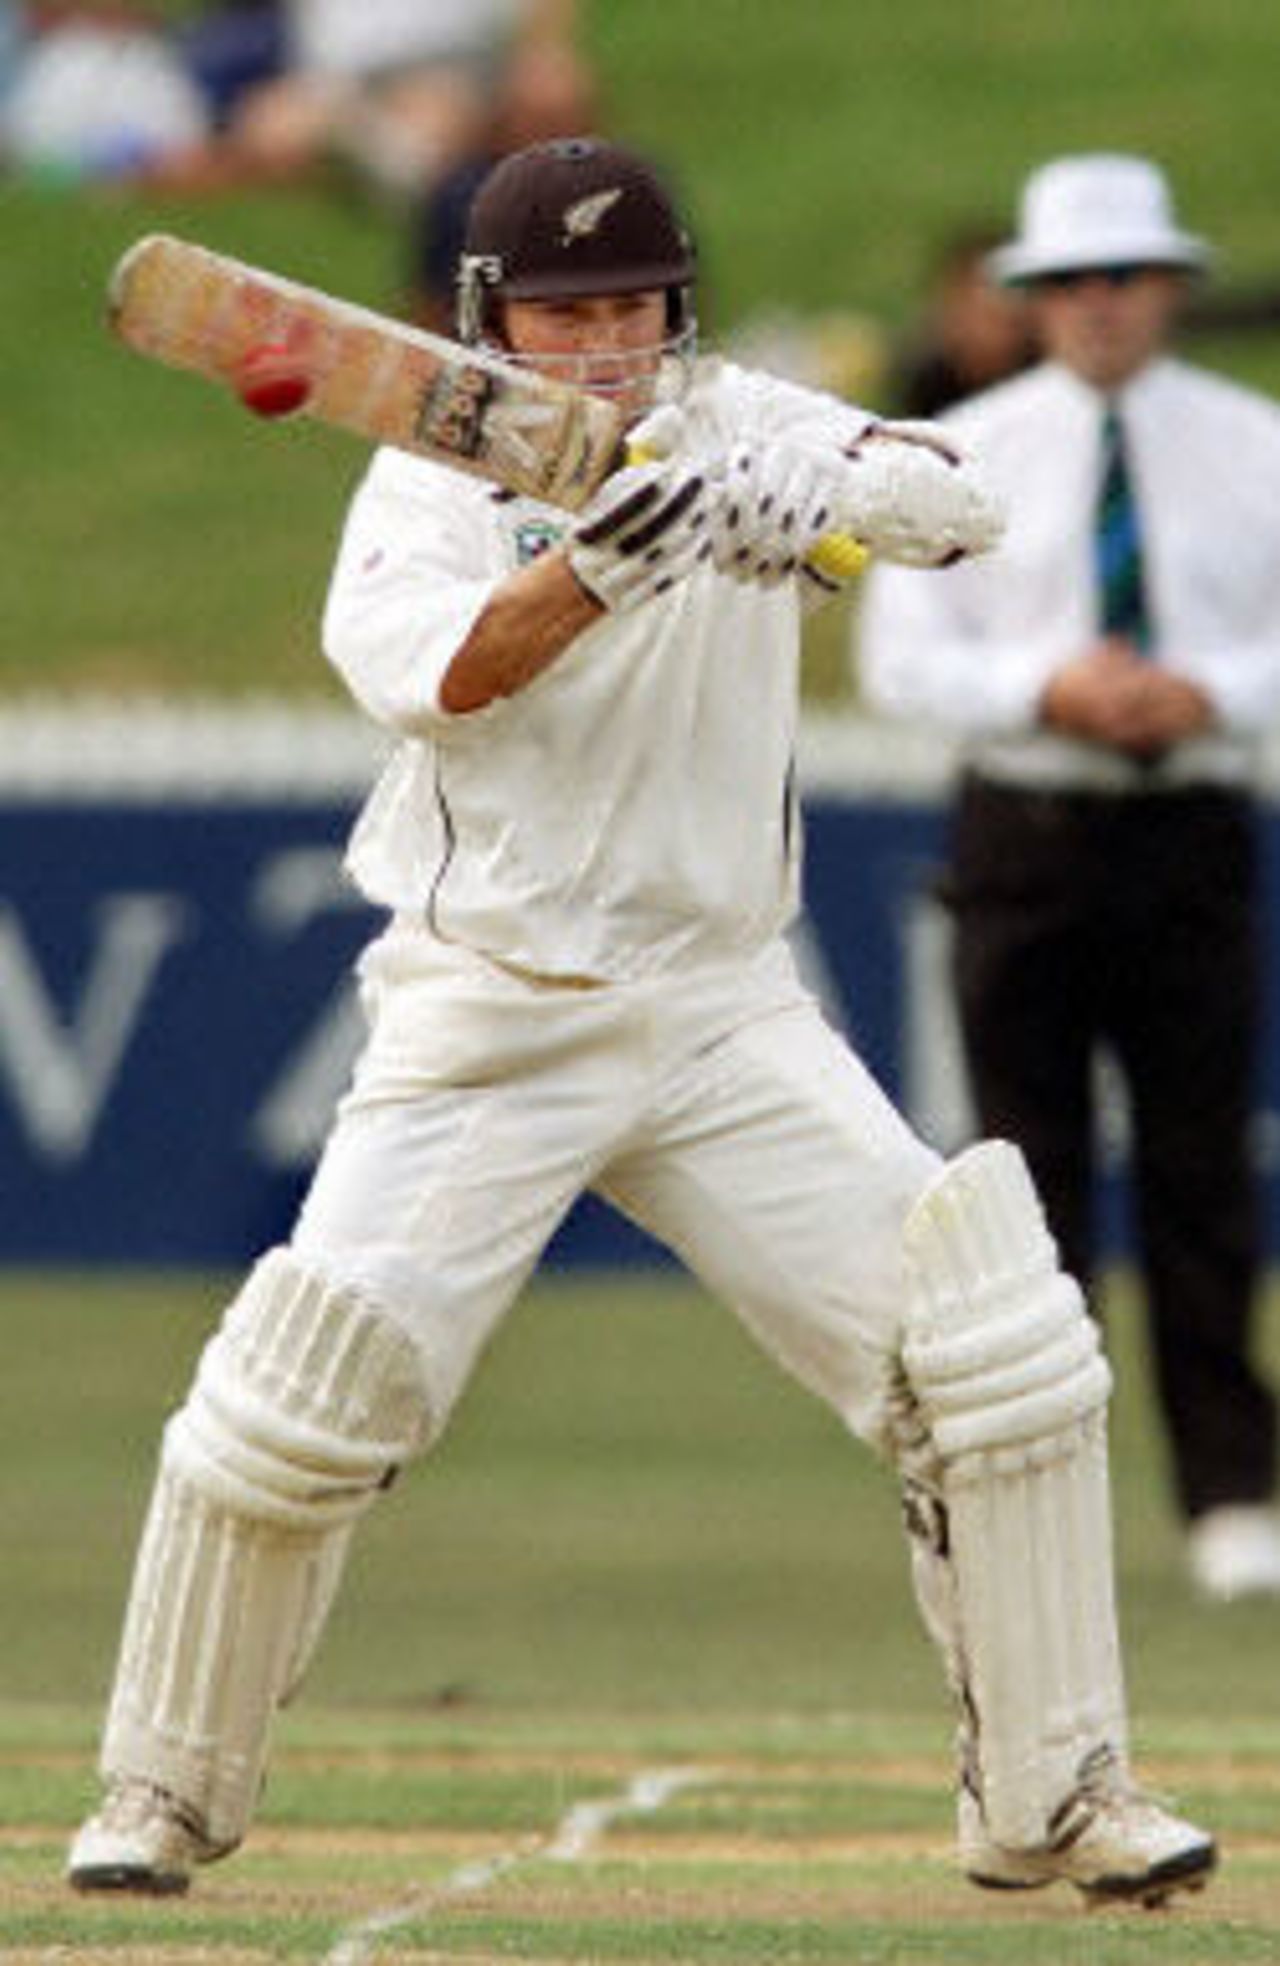 Matthew Bell smashes a delivery to the boundary, day 1, 3rd Test at Hamilton, 27-31 March 2001.